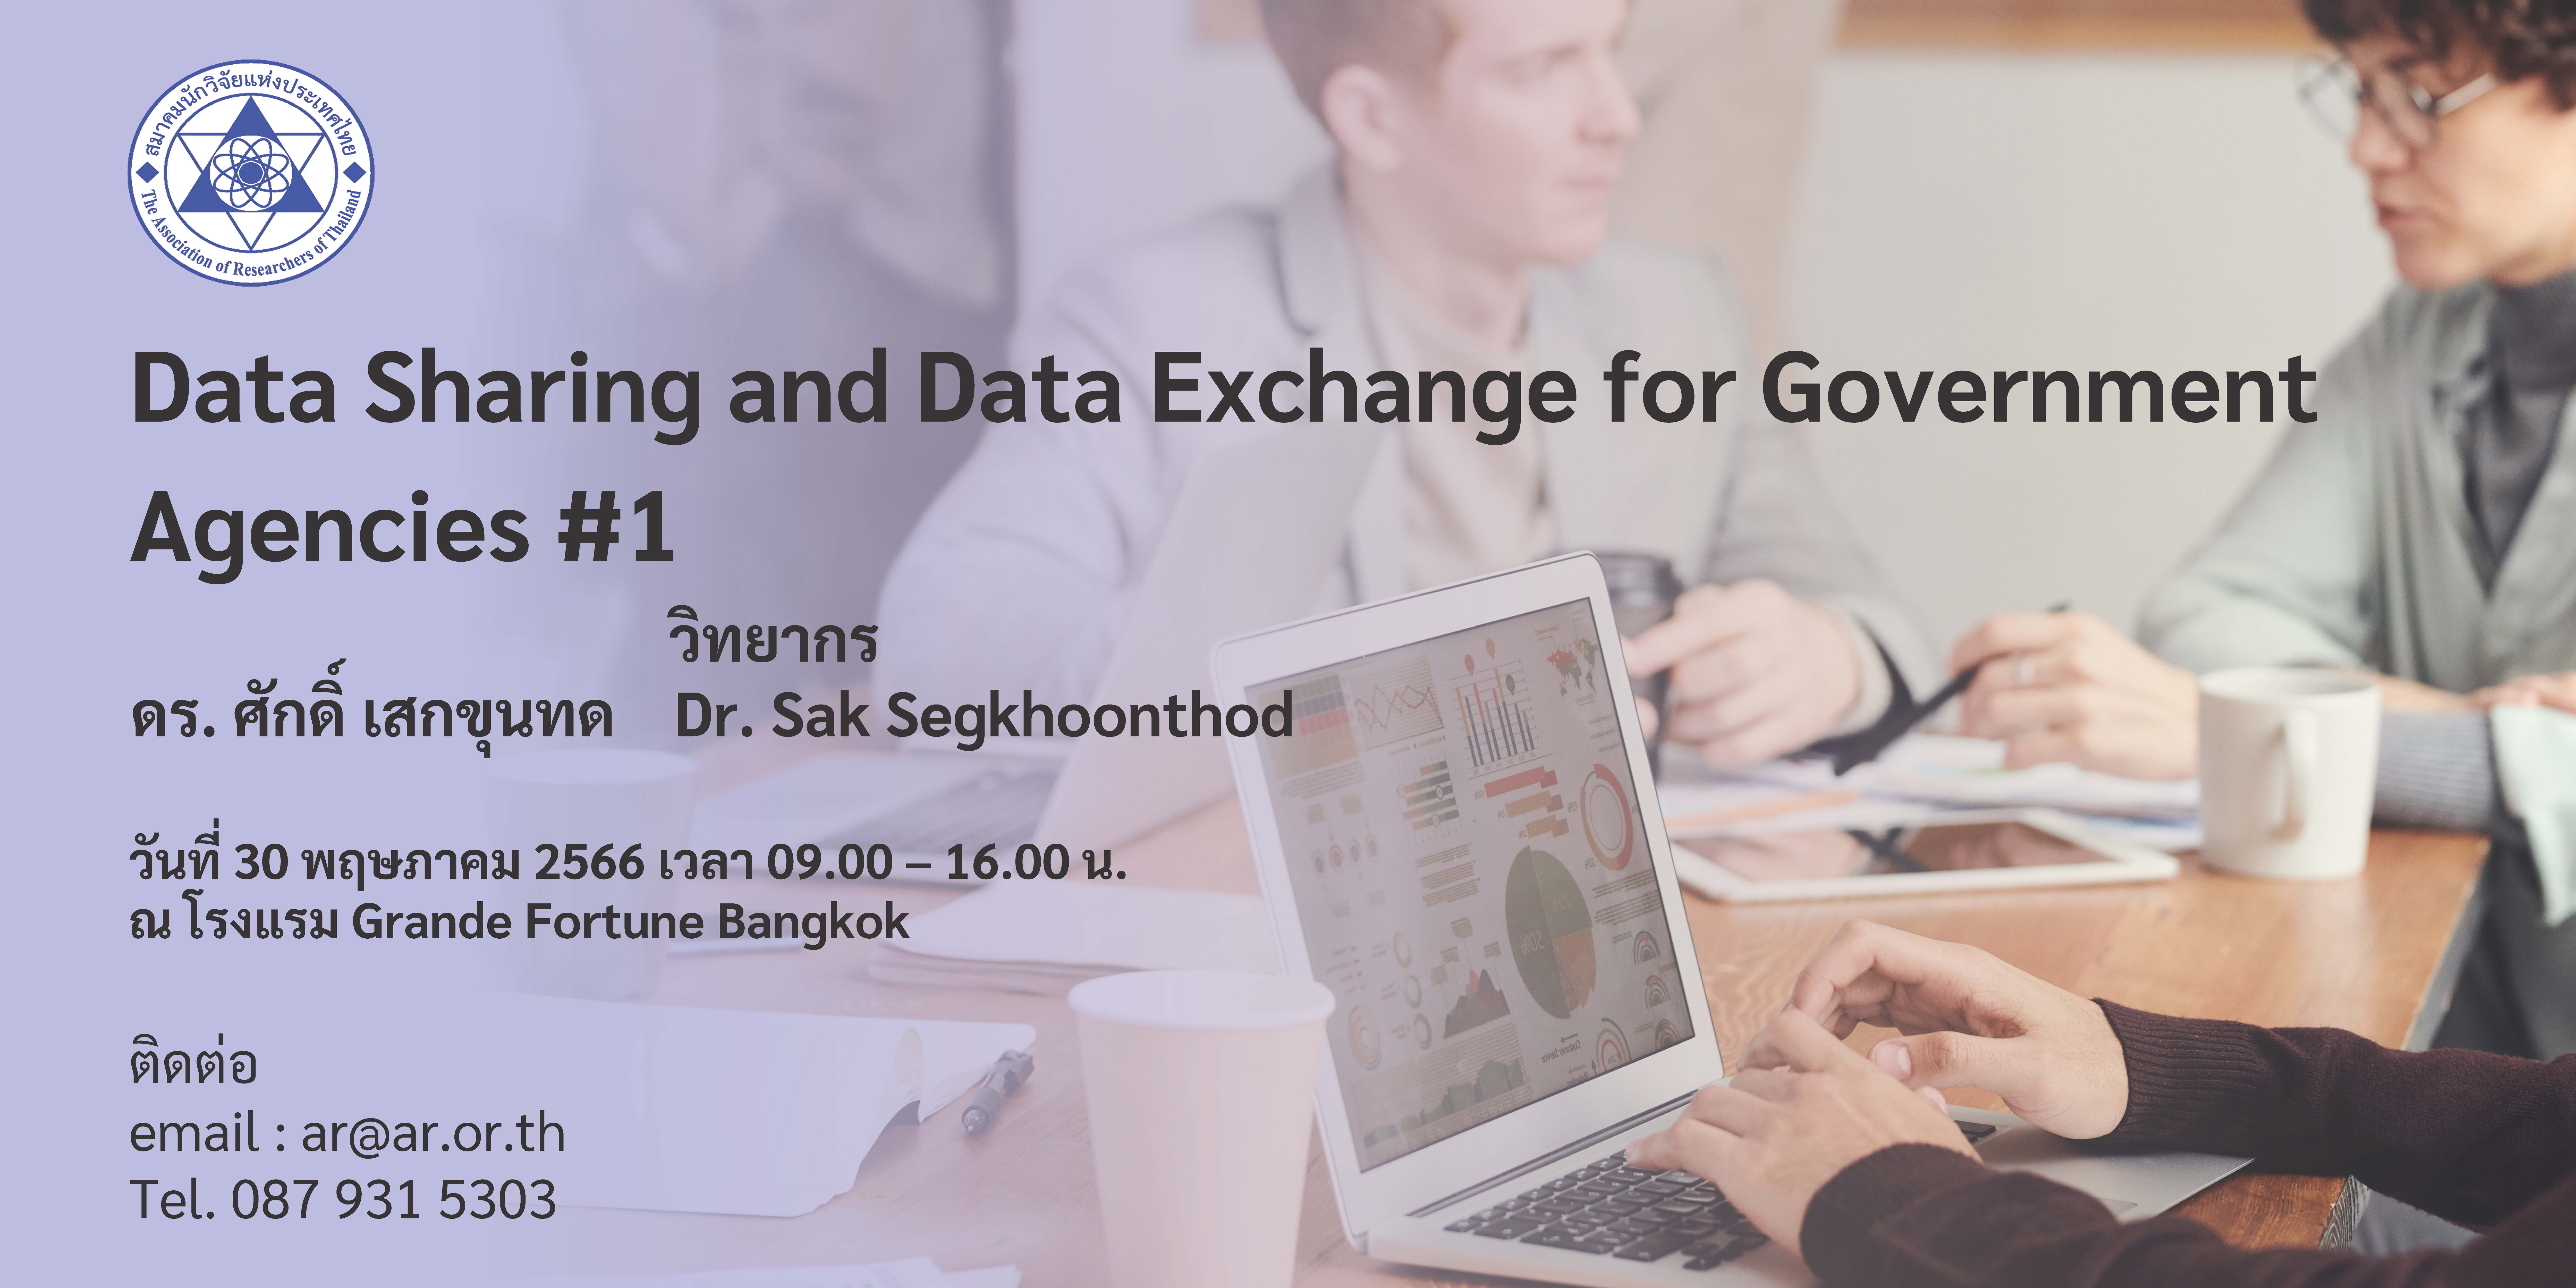 Data Sharing and Data Exchange for Government Agencies